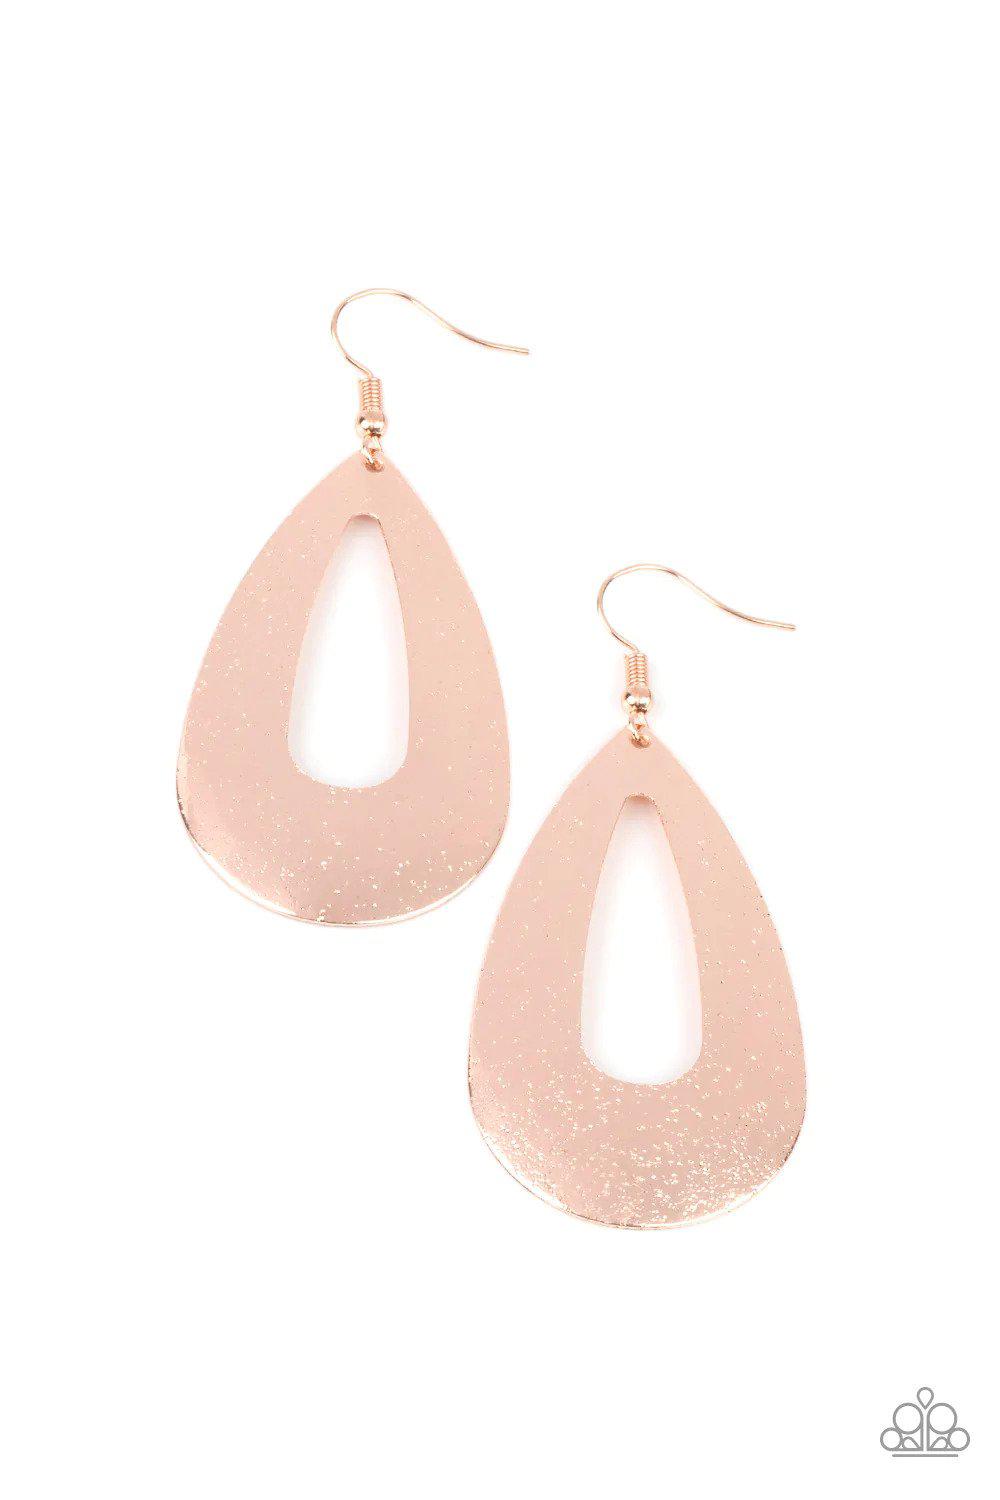 Hand It OVAL! Rose Gold Earrings - Paparazzi Accessories- lightbox - CarasShop.com - $5 Jewelry by Cara Jewels